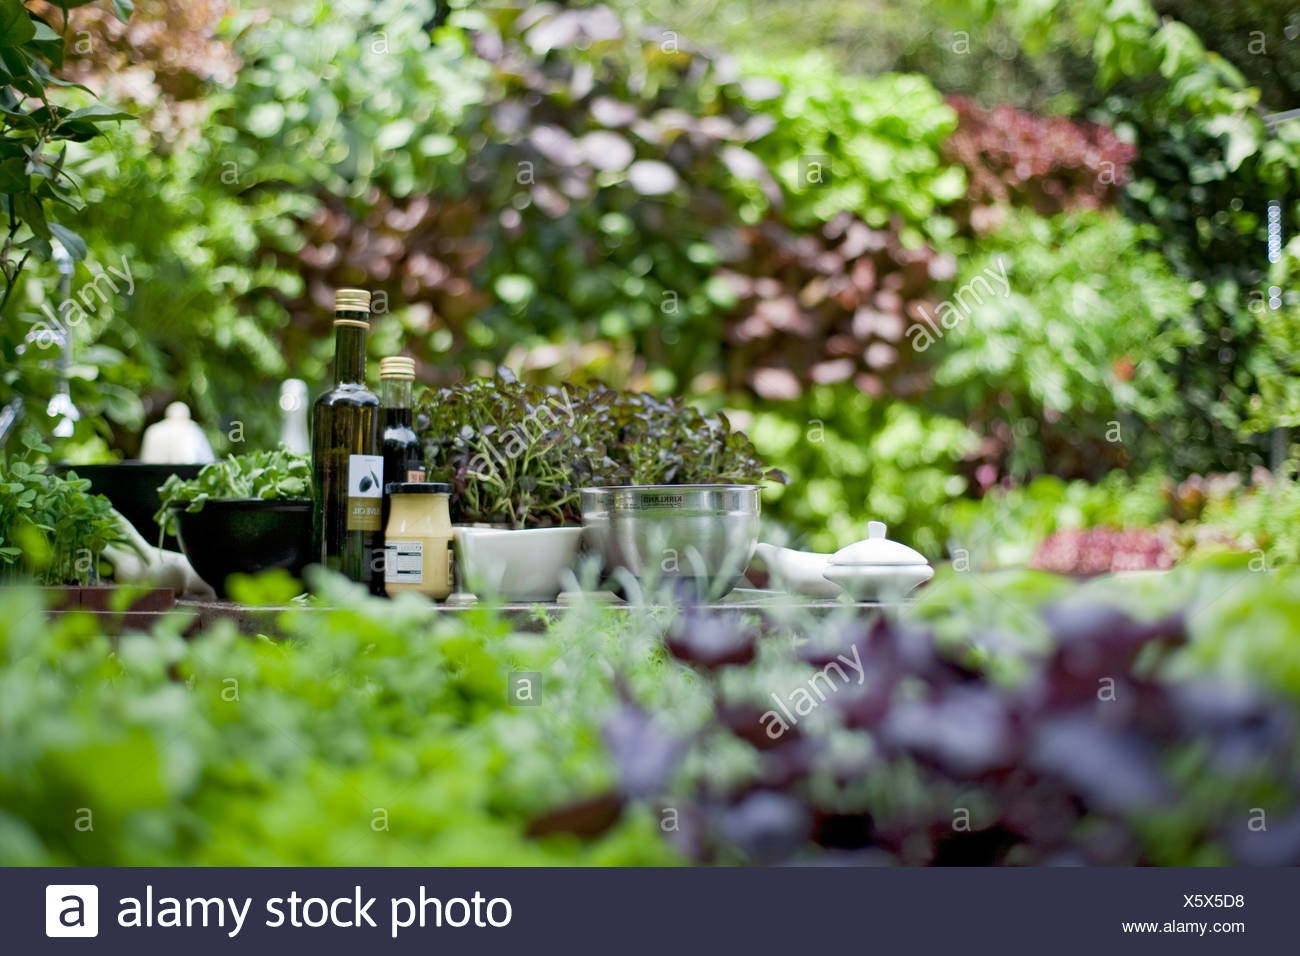 Chelsea Flower Show Detail Image Of Outdokitchen Herbs Bowls And